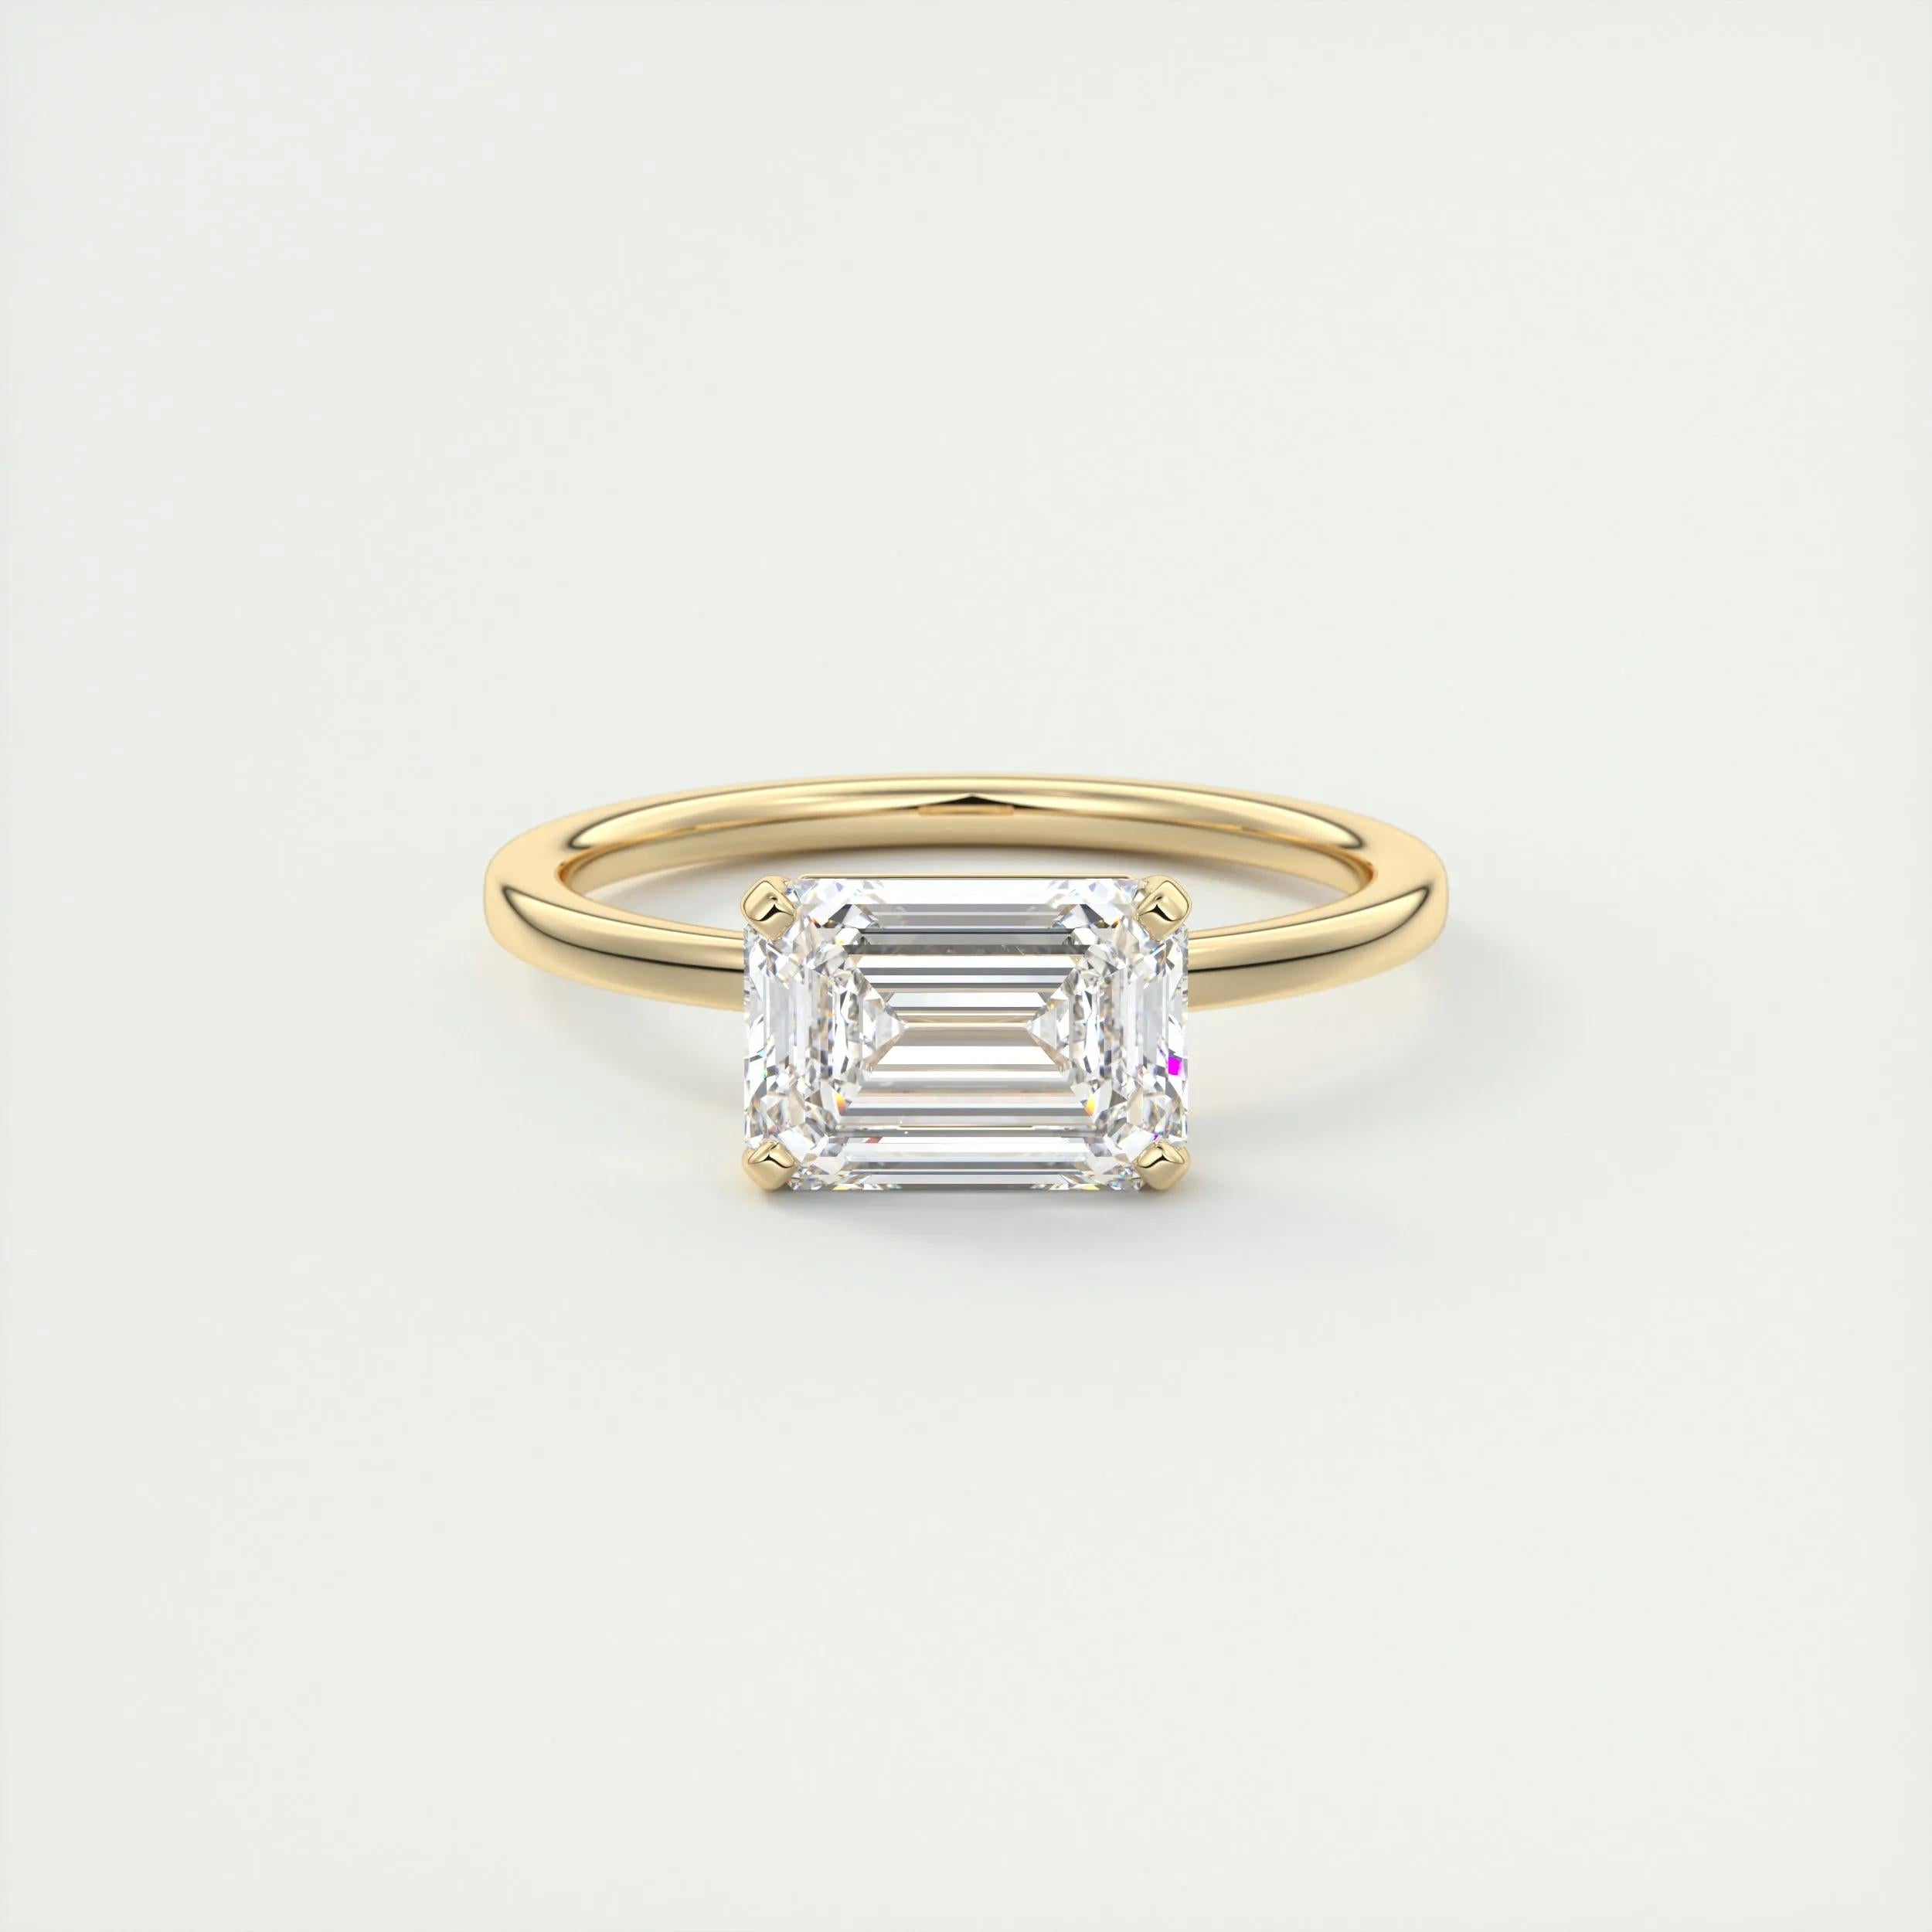 1.91 CT Emerald Cut Solitaire Moissanite Engagement Ring 9